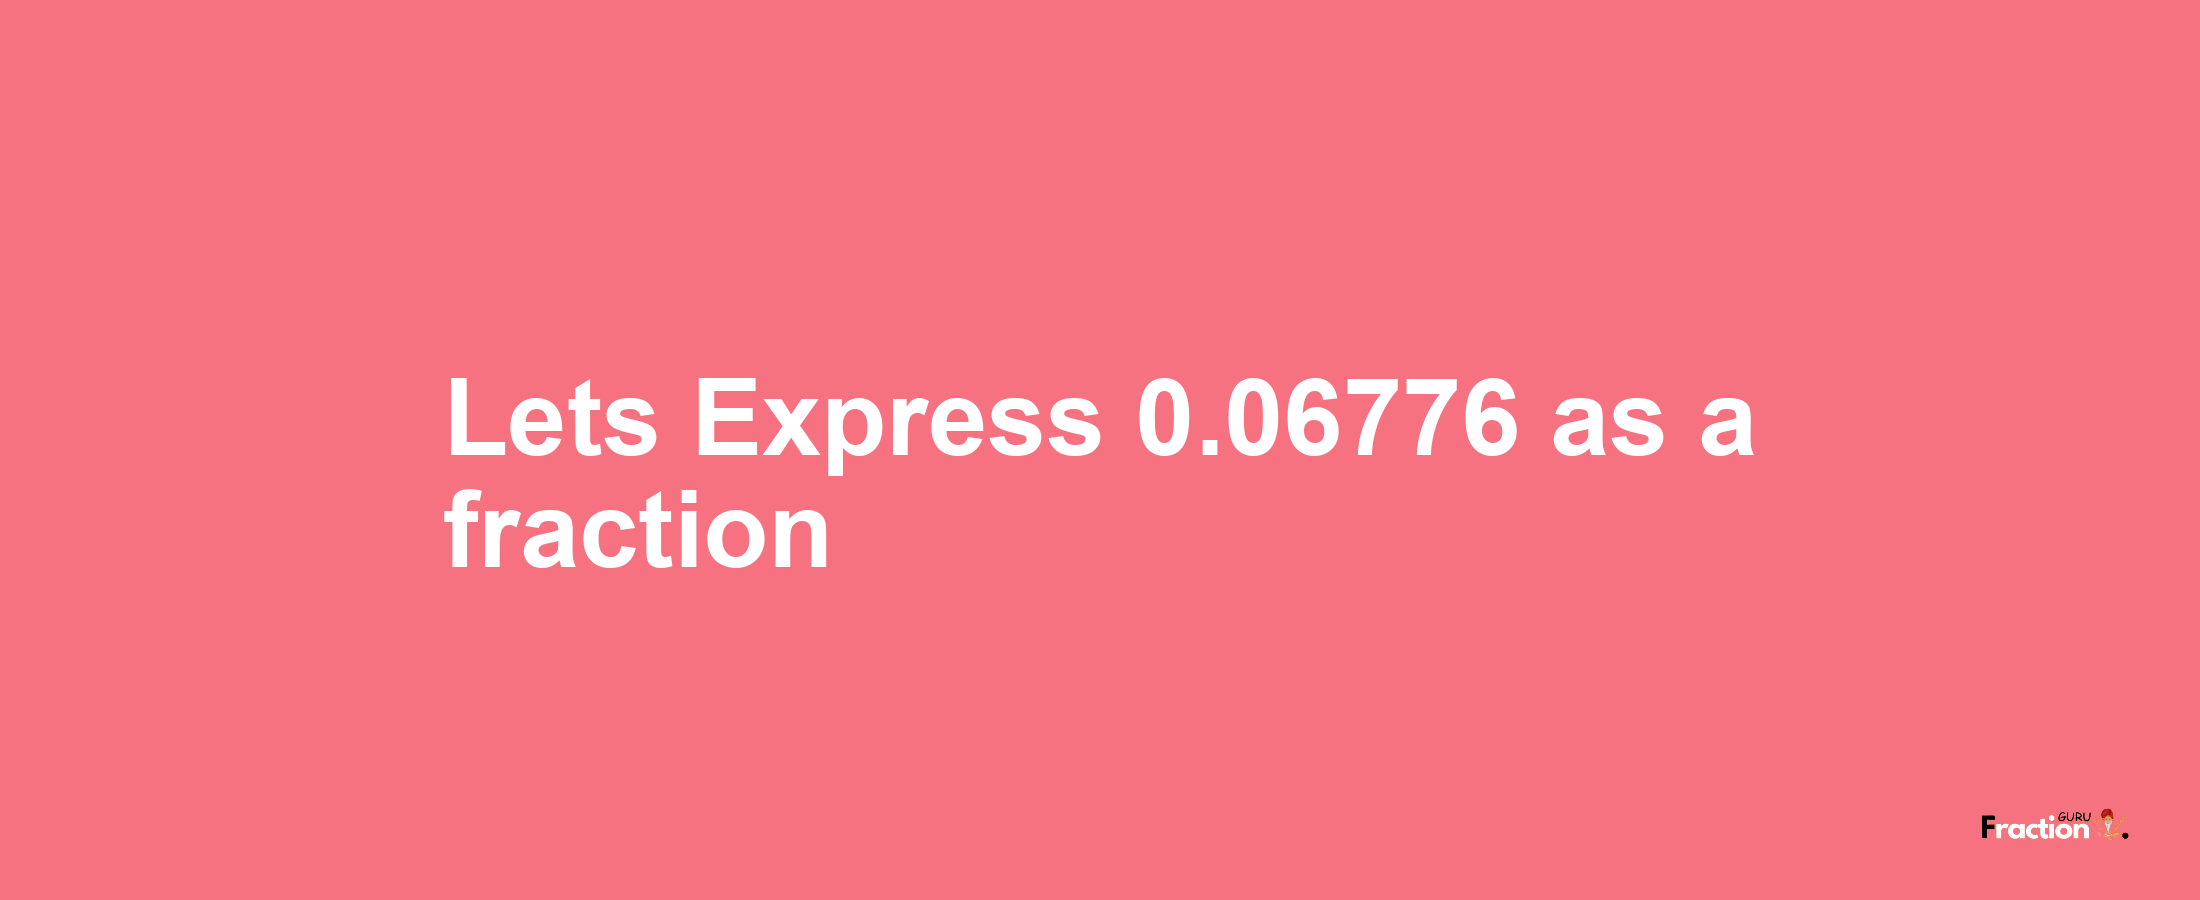 Lets Express 0.06776 as afraction